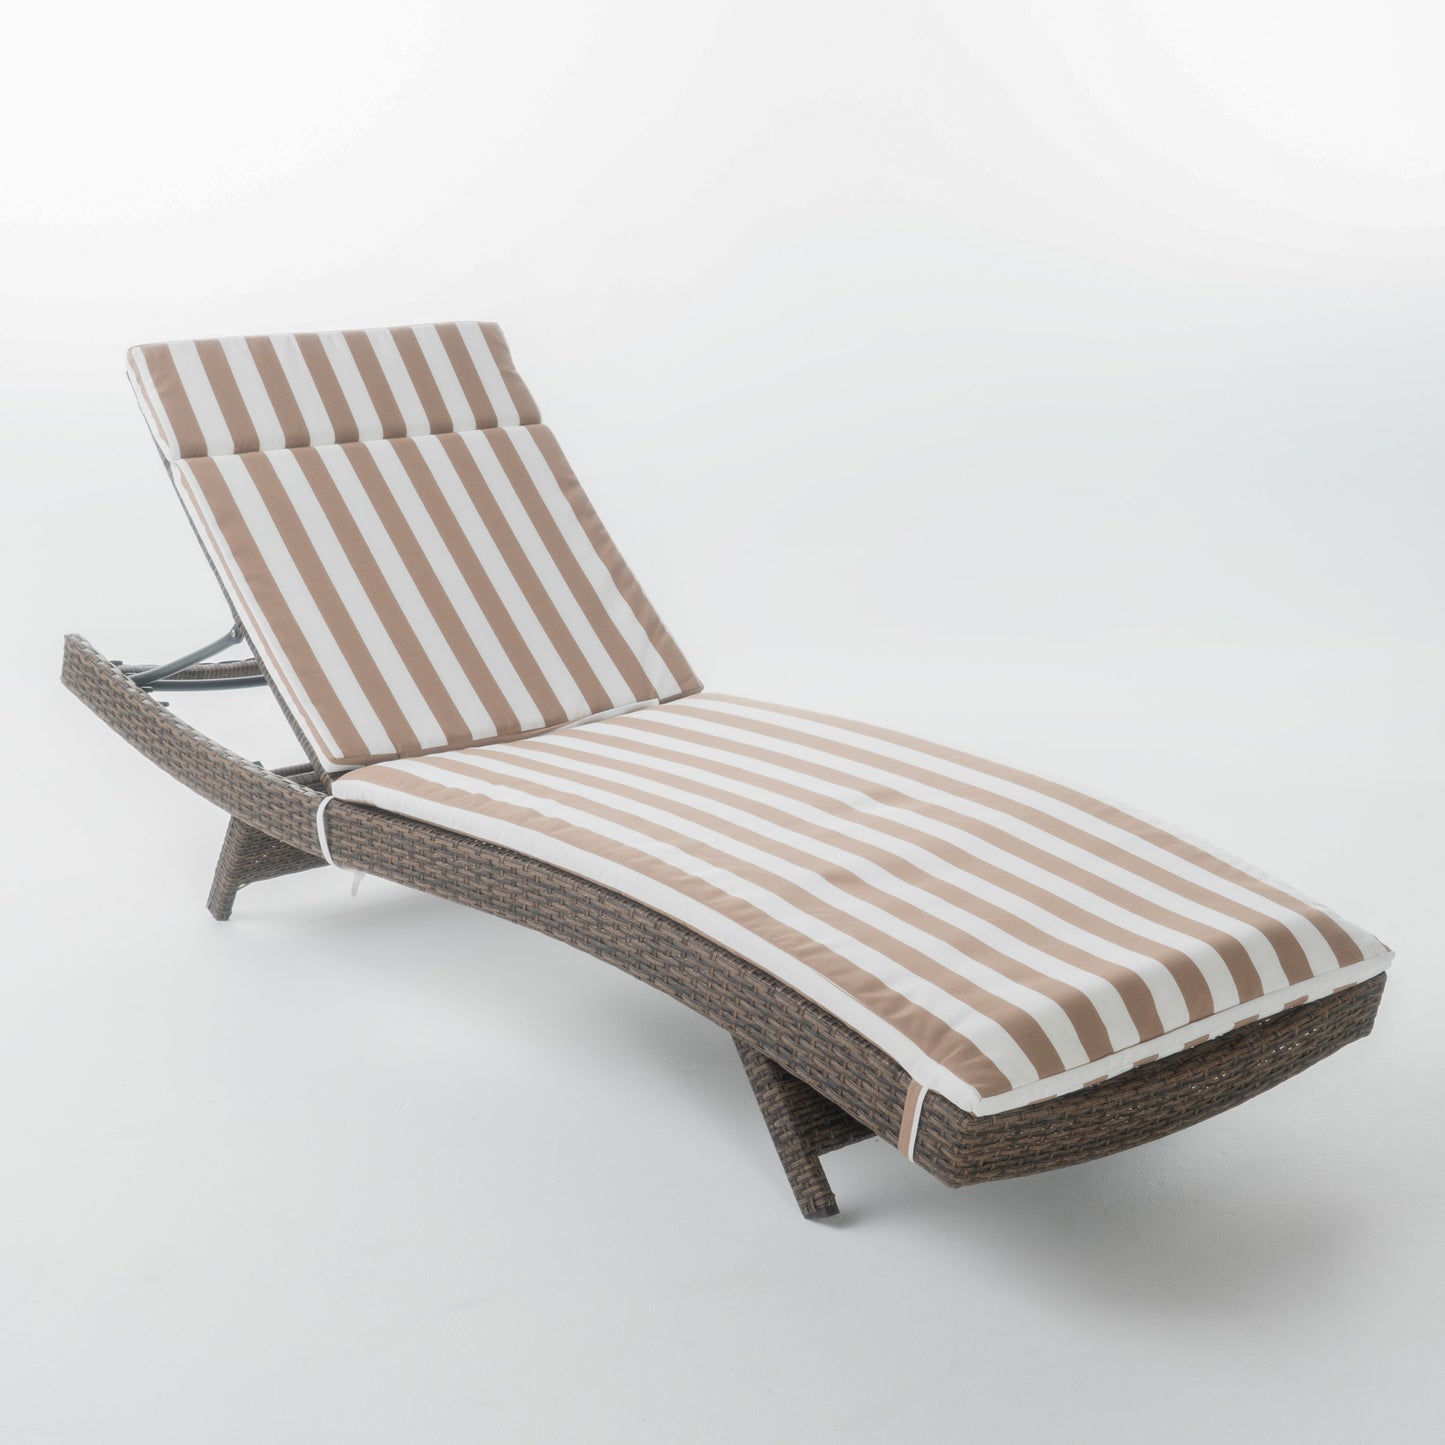 Lakeport Outdoor Wicker Lounge w/Brown & White Stripe Water Resistant Cusions